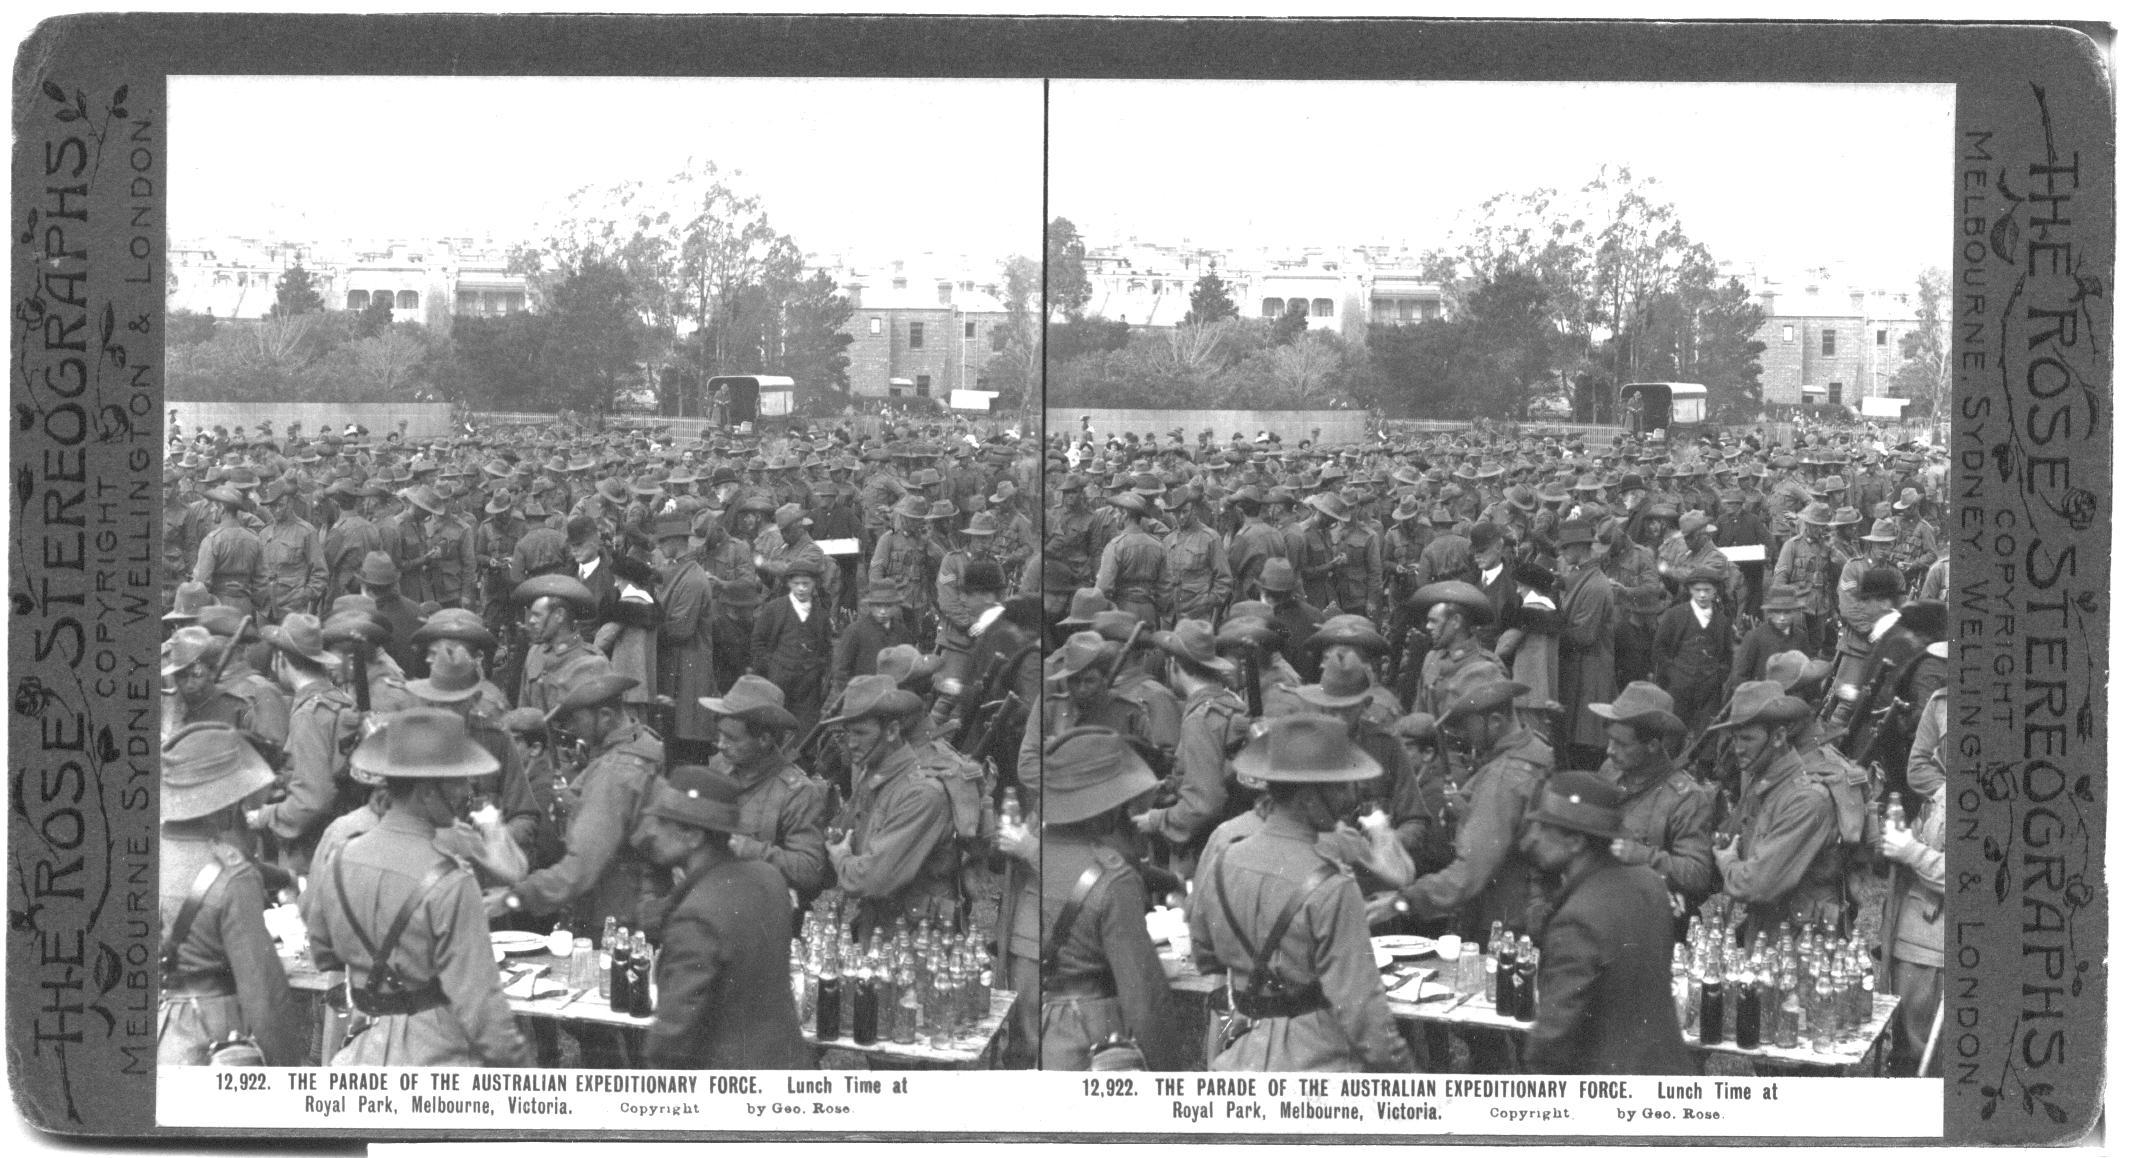 THE PARADE OF THE AUSTRALIAN EXPEDITIONARY FORCE. Lunch Time at Royal Park, Melbourne, Victoria.